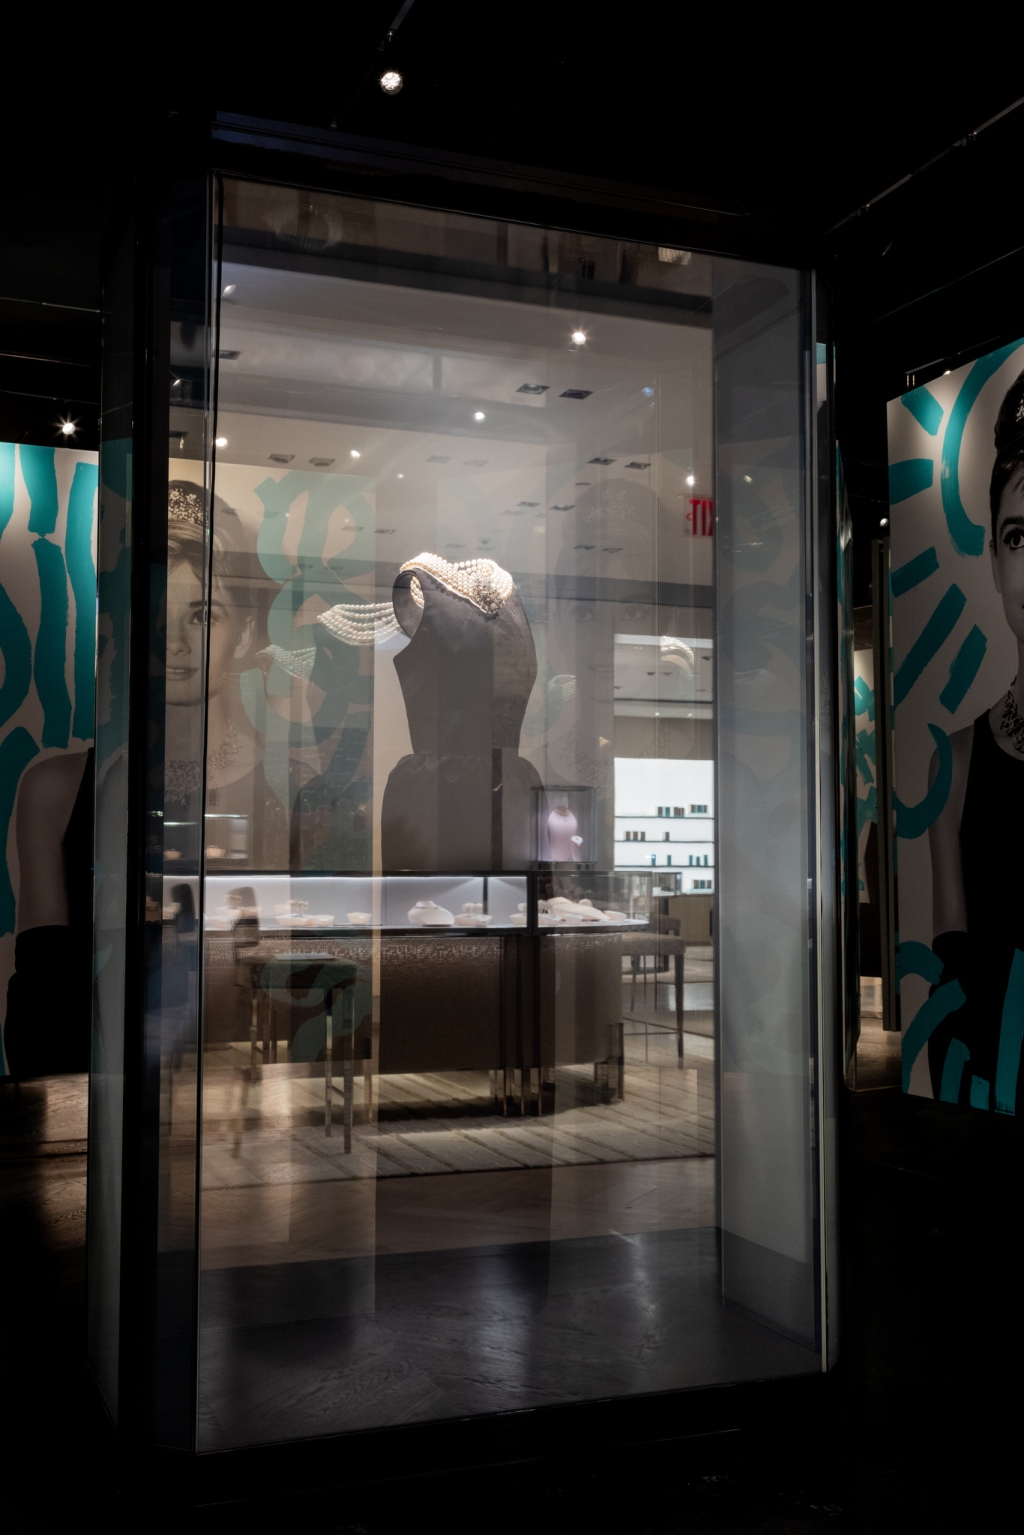 A first view at Landmark's "The Audrey Experience" - an immersive exhibit that takes visitors inside "Breakfast at Tiffany's." It includes a replica of Audrey Hepburn's Givenchy dress from the film.